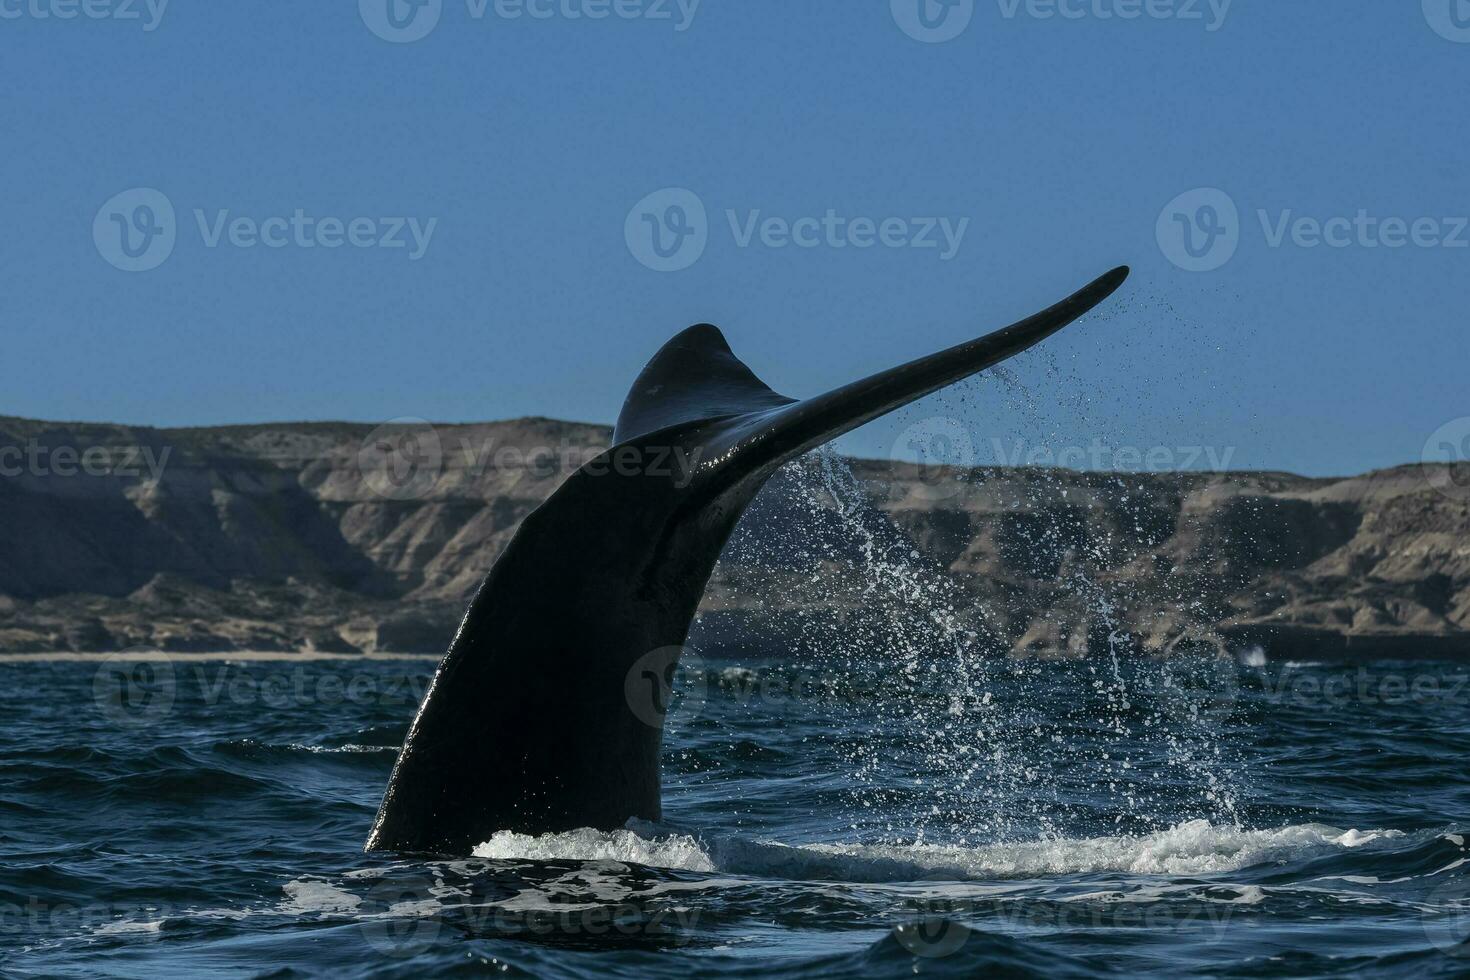 Sohutern right whale tail, endangered species, Patagonia,Argentina photo